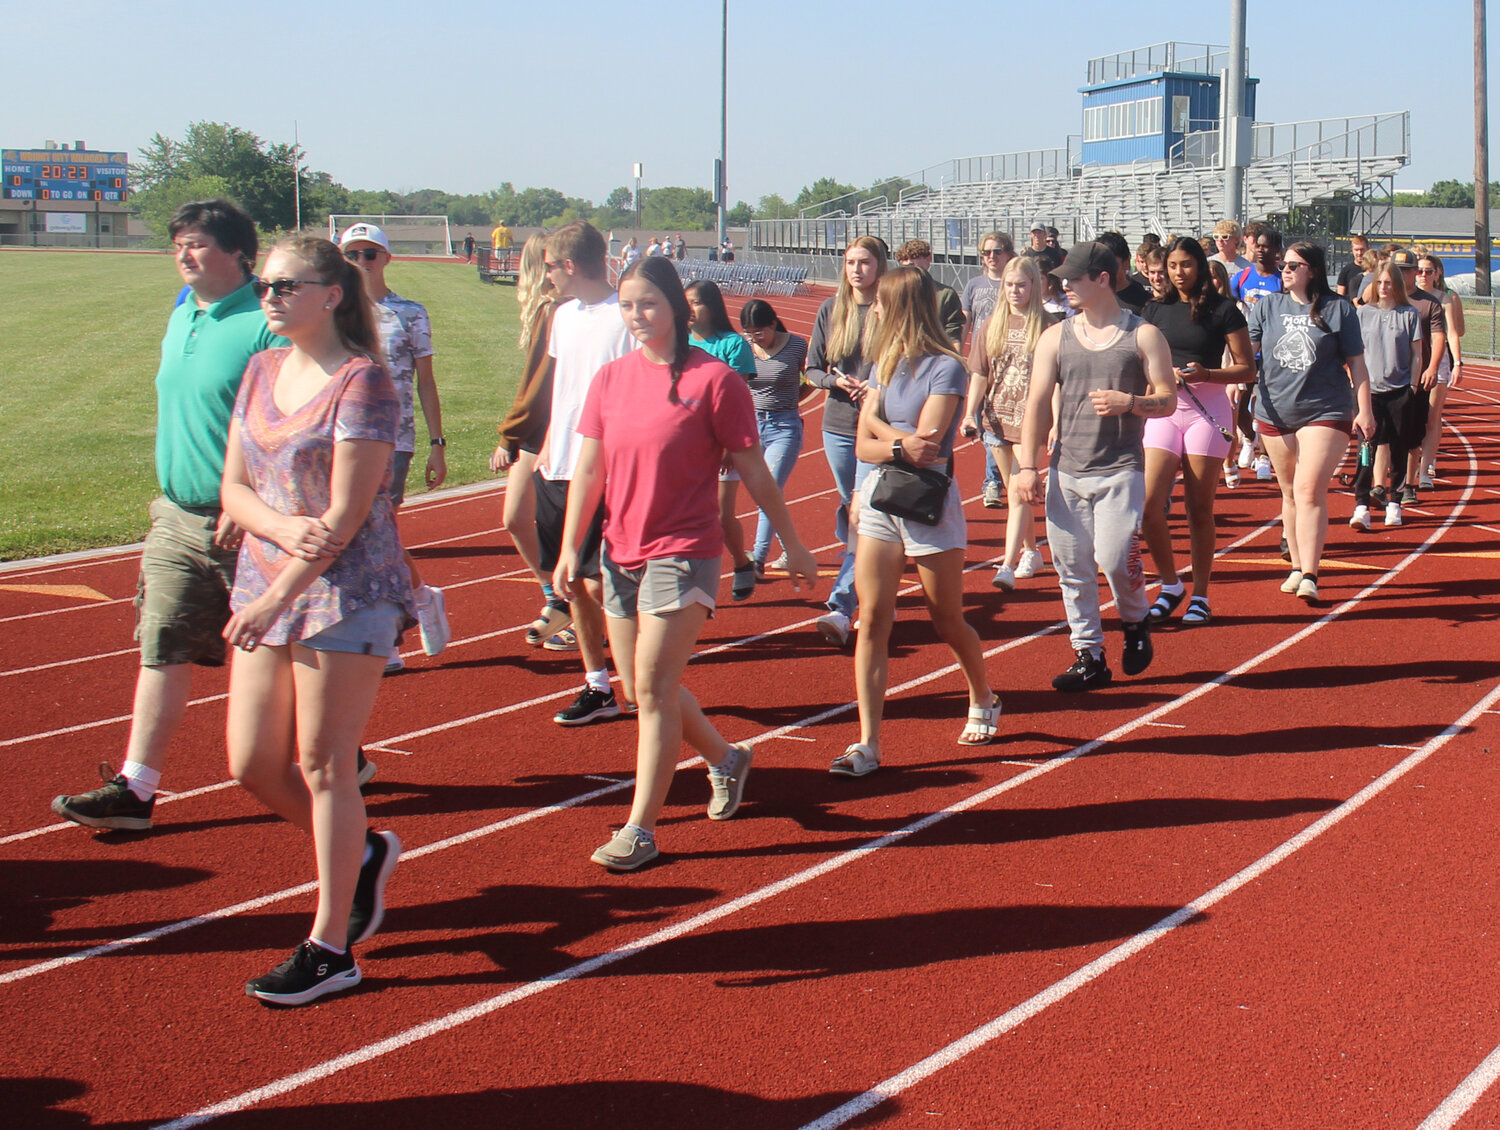 More than 100 Wright City high school seniors made their way down the track to prepare for the start of the graduation ceremony rehearsal on June 1.